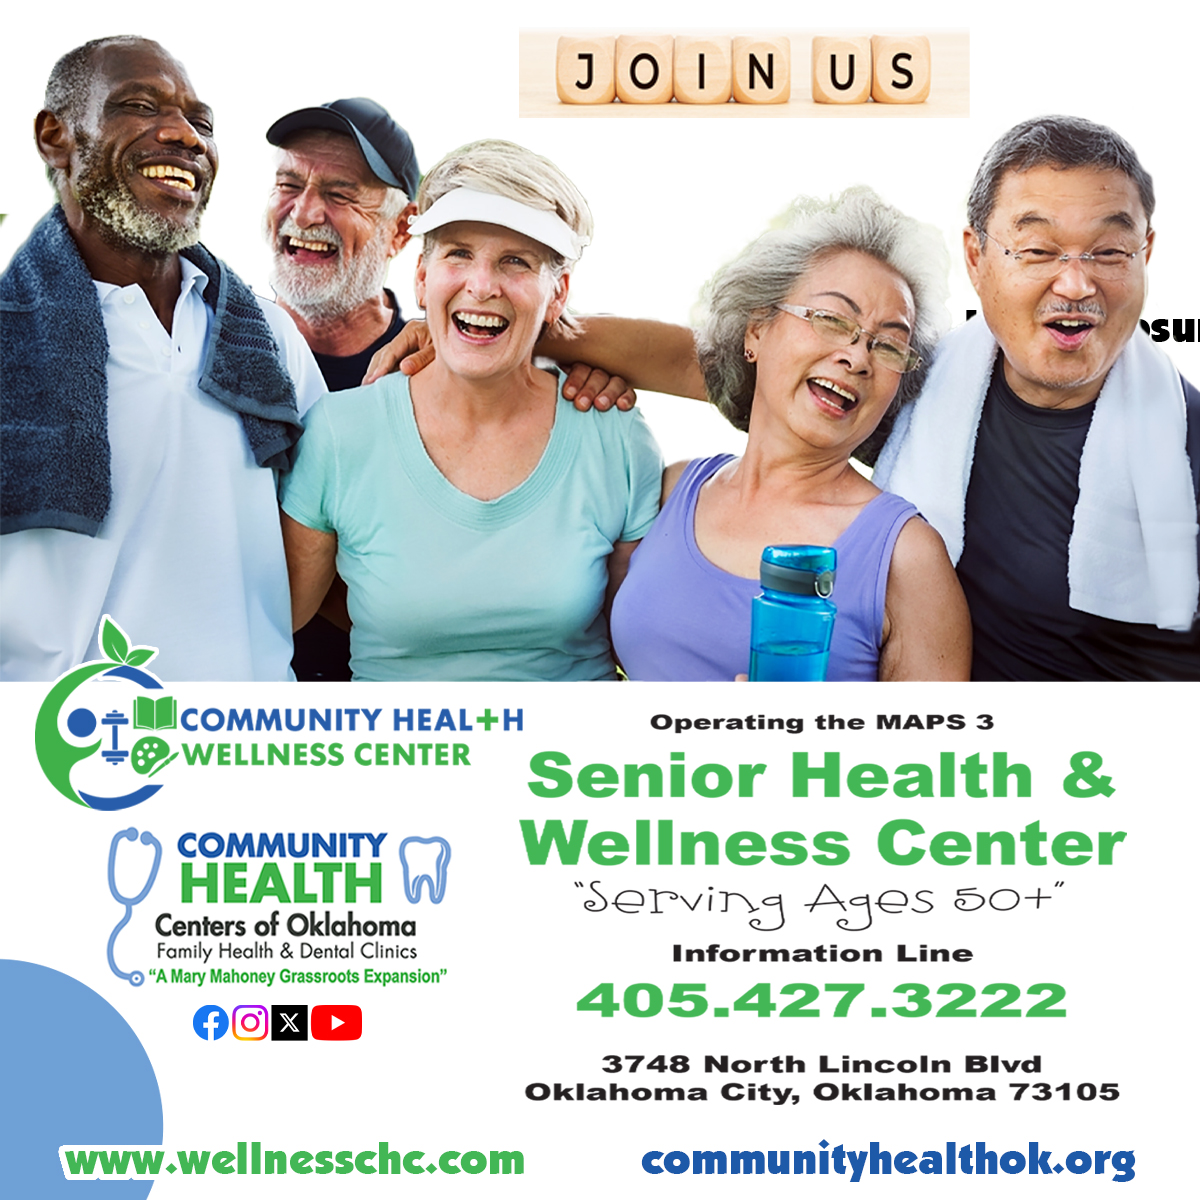 HEALTH RESTORE FOR 2024

ENROLL TODAY and join us at the Senior Health and Wellness Center

Visit wellnesschc.com or call our information line: 405.427.3222

#50plus #seniorwellnes